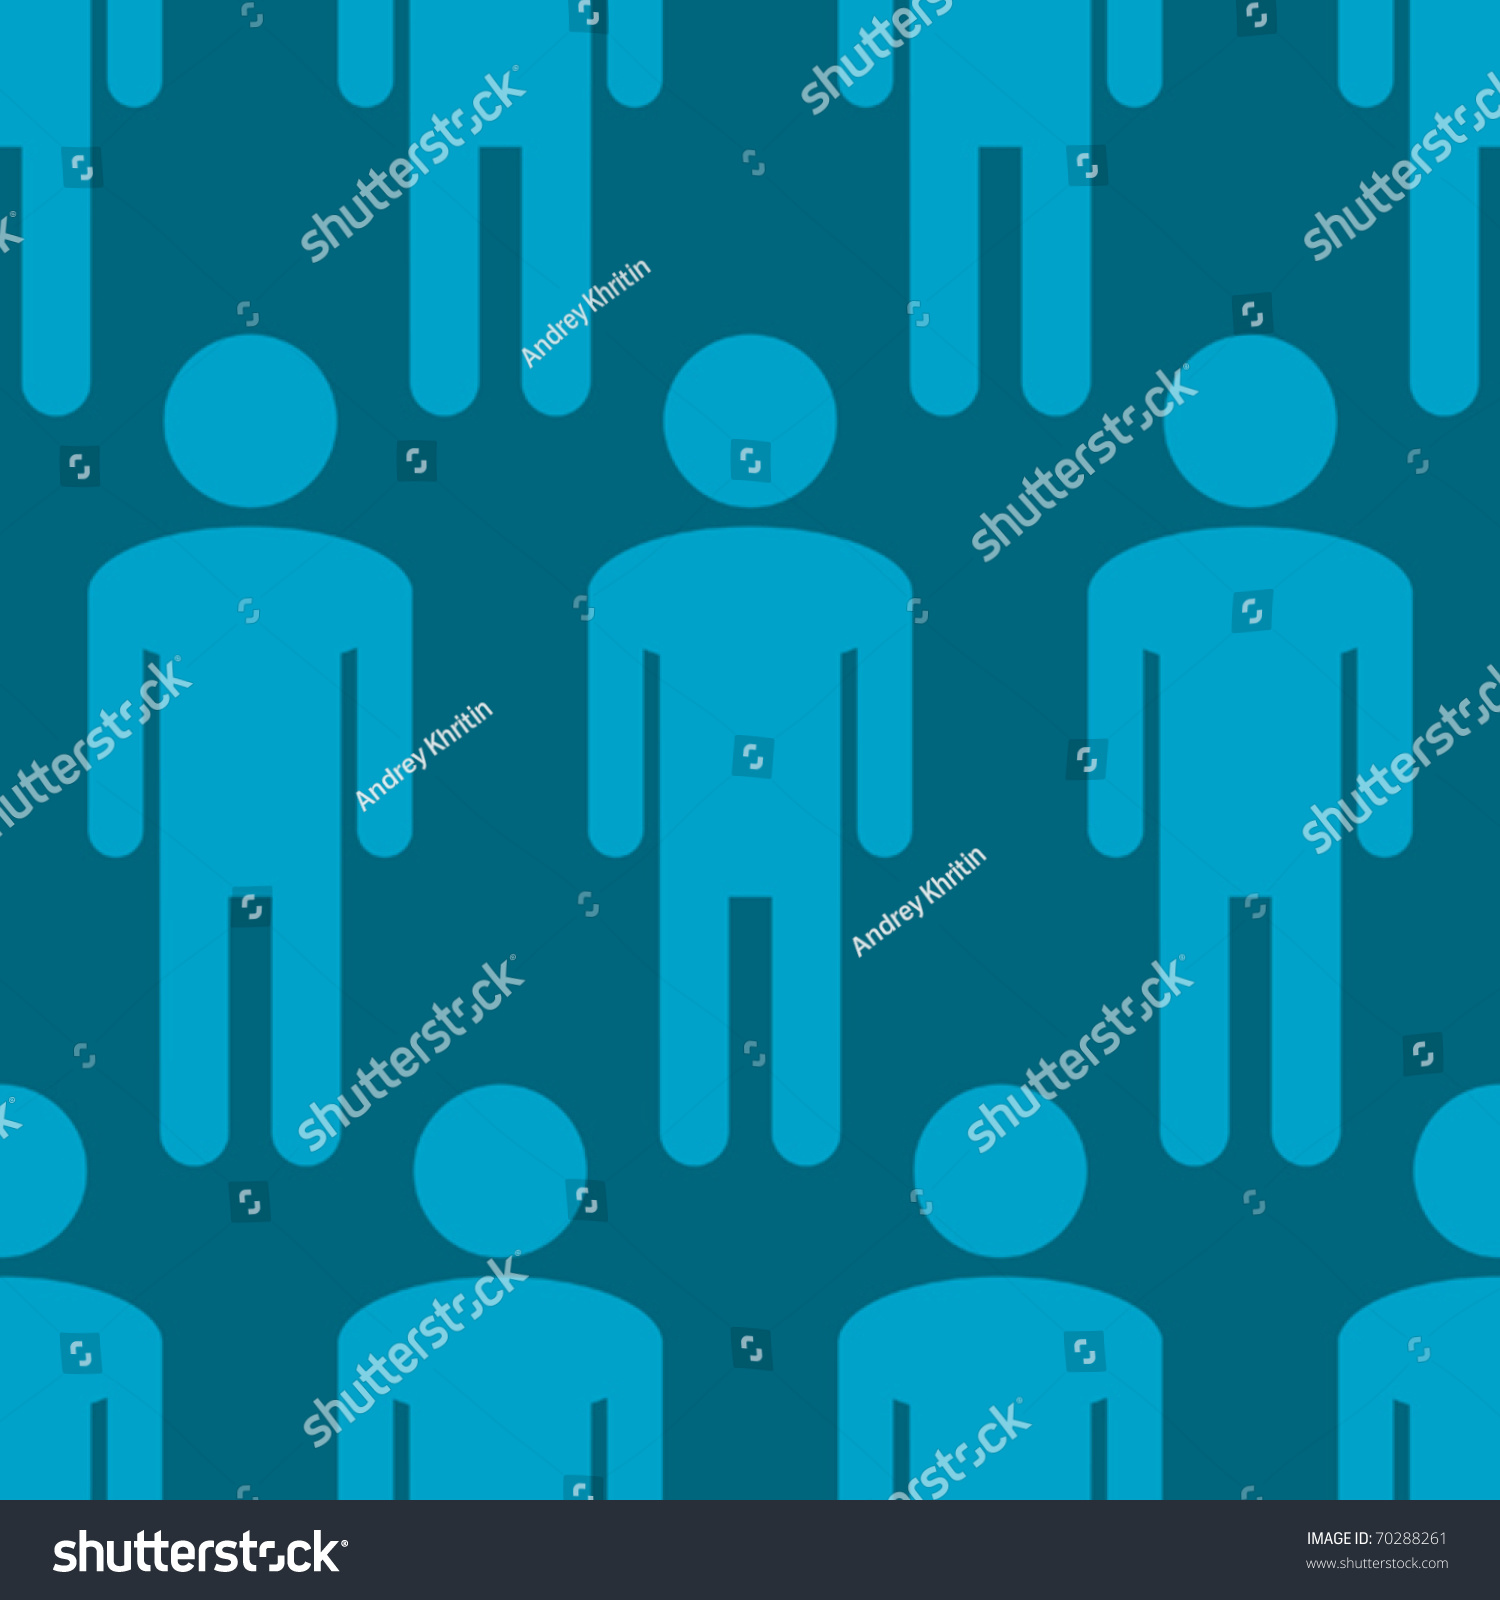 Abstract Blue Background With Silhouettes Of Men. Seamless Pattern For ...